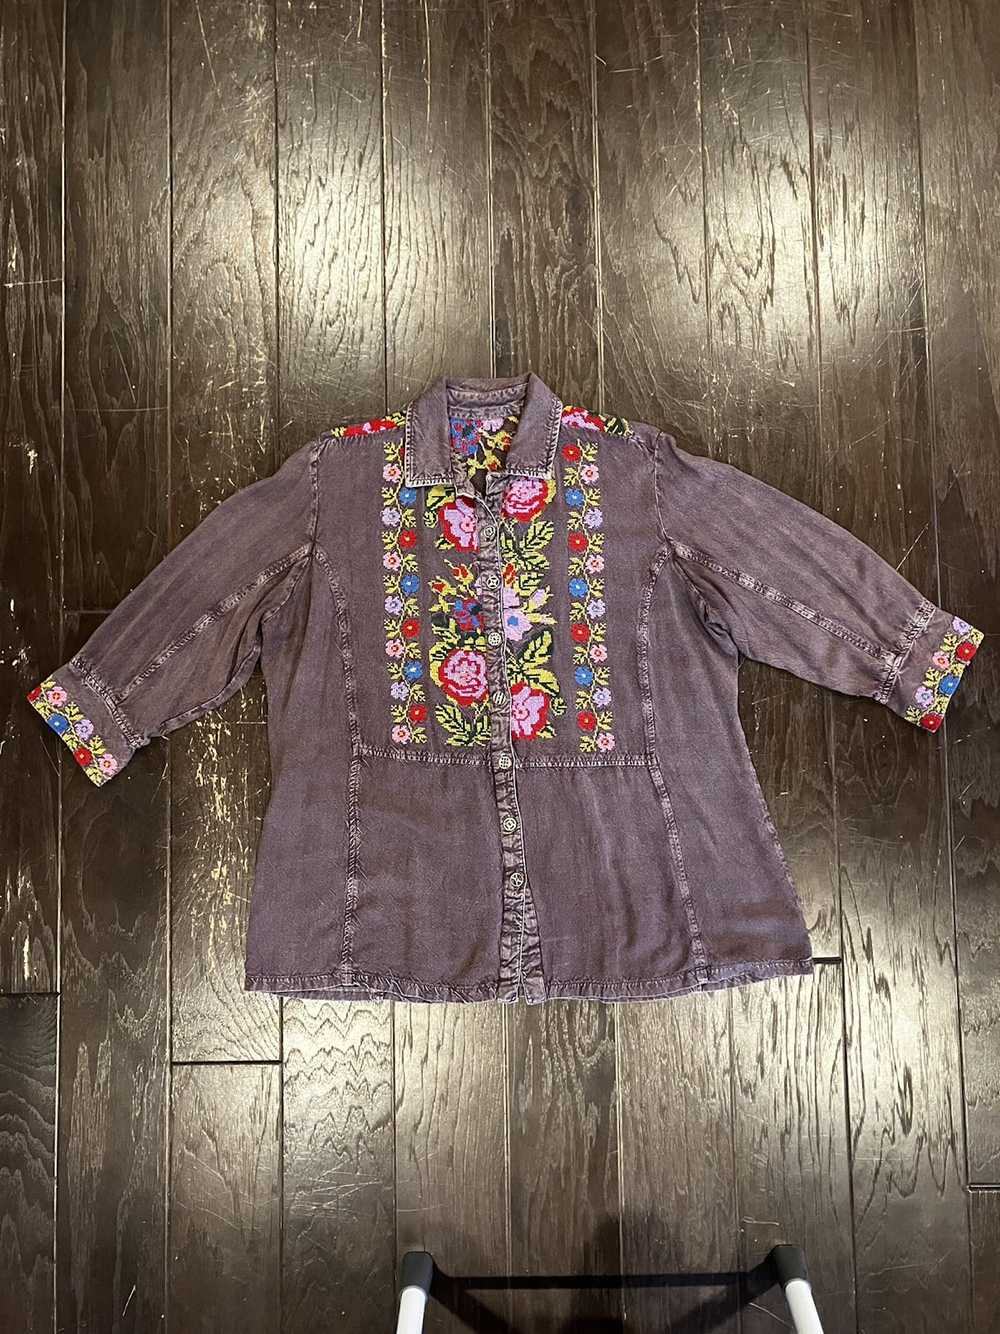 Streetwear × Vintage Cross stitched, flowers shirt - image 2